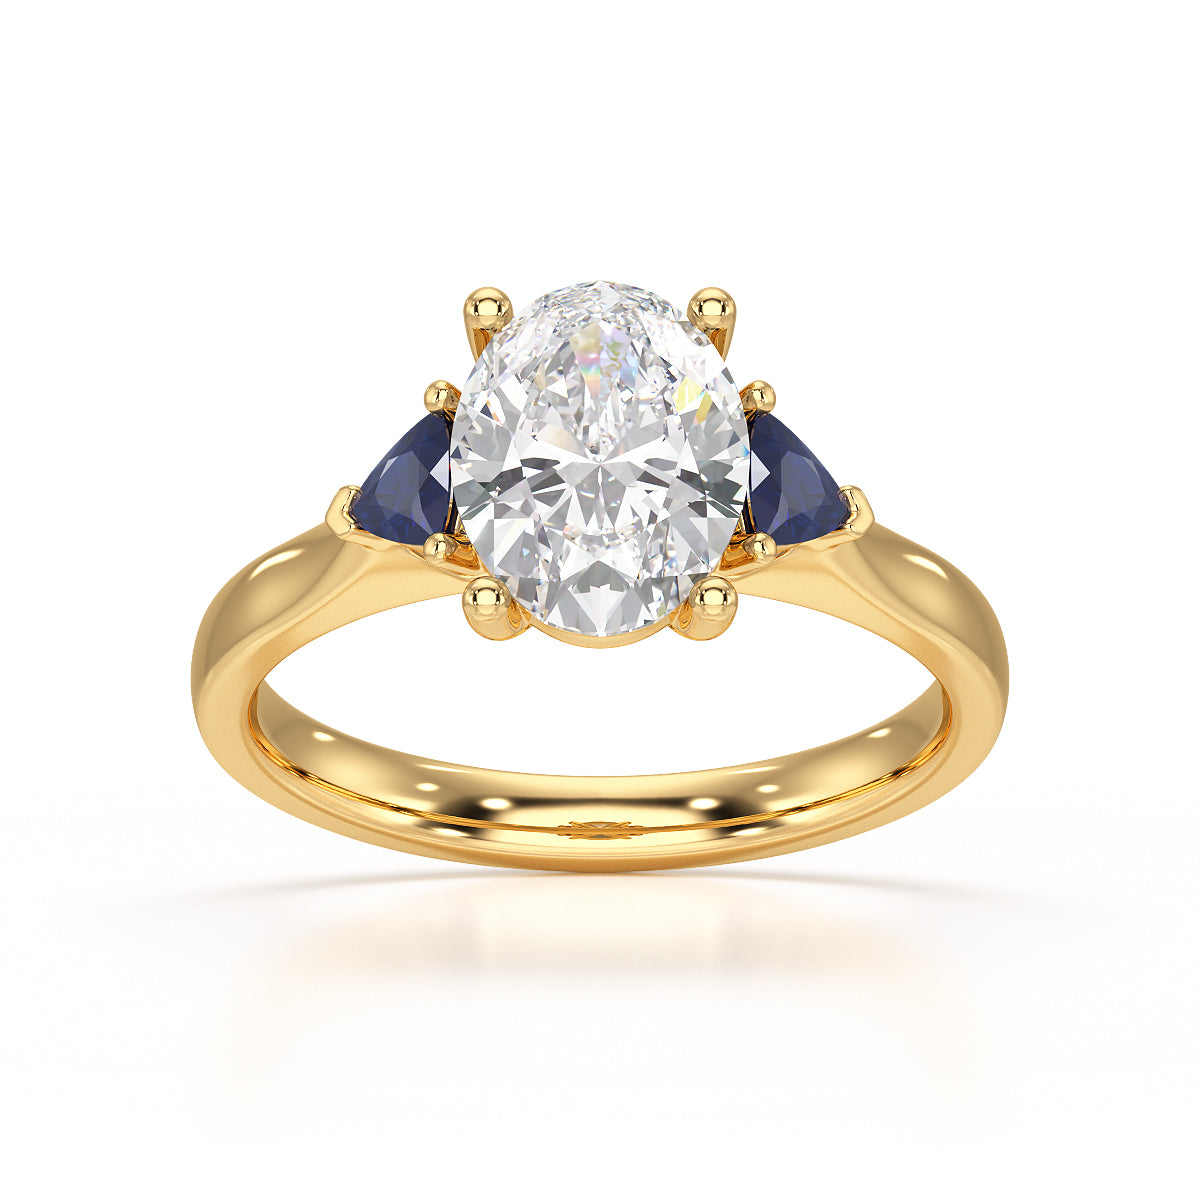 Oval trilogy with trillion blue sapphire side stones Dress ring